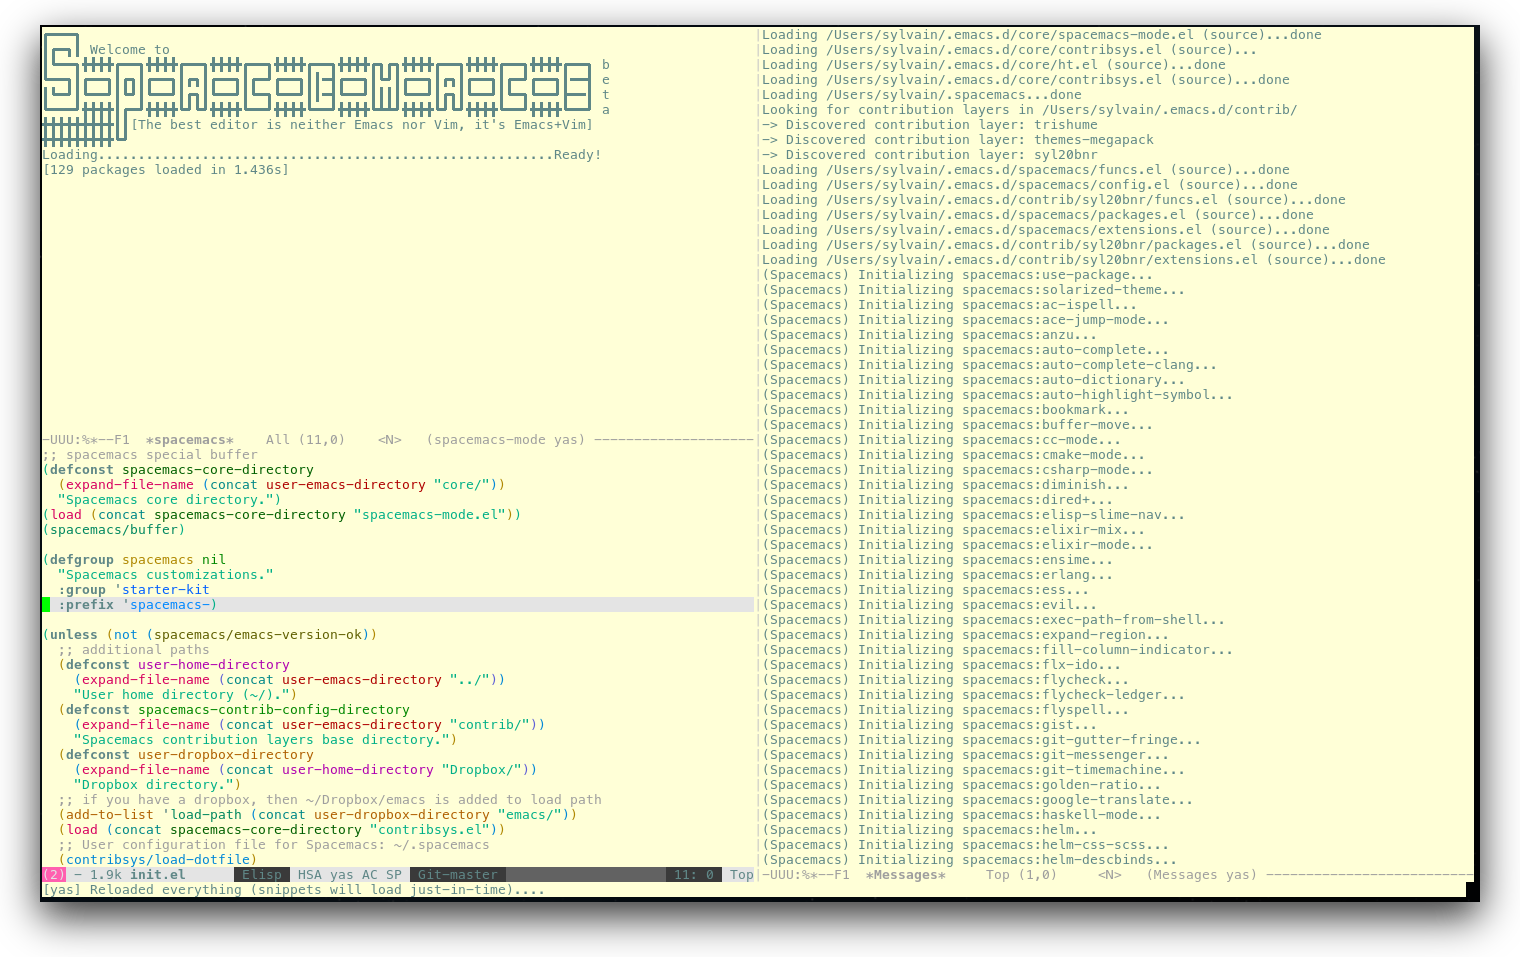 /TakeV/spacemacs/media/commit/e9ebd7e343ee2ebd961b74a5d21fb0733772d376/doc/img/spacemacs-urxvt.png